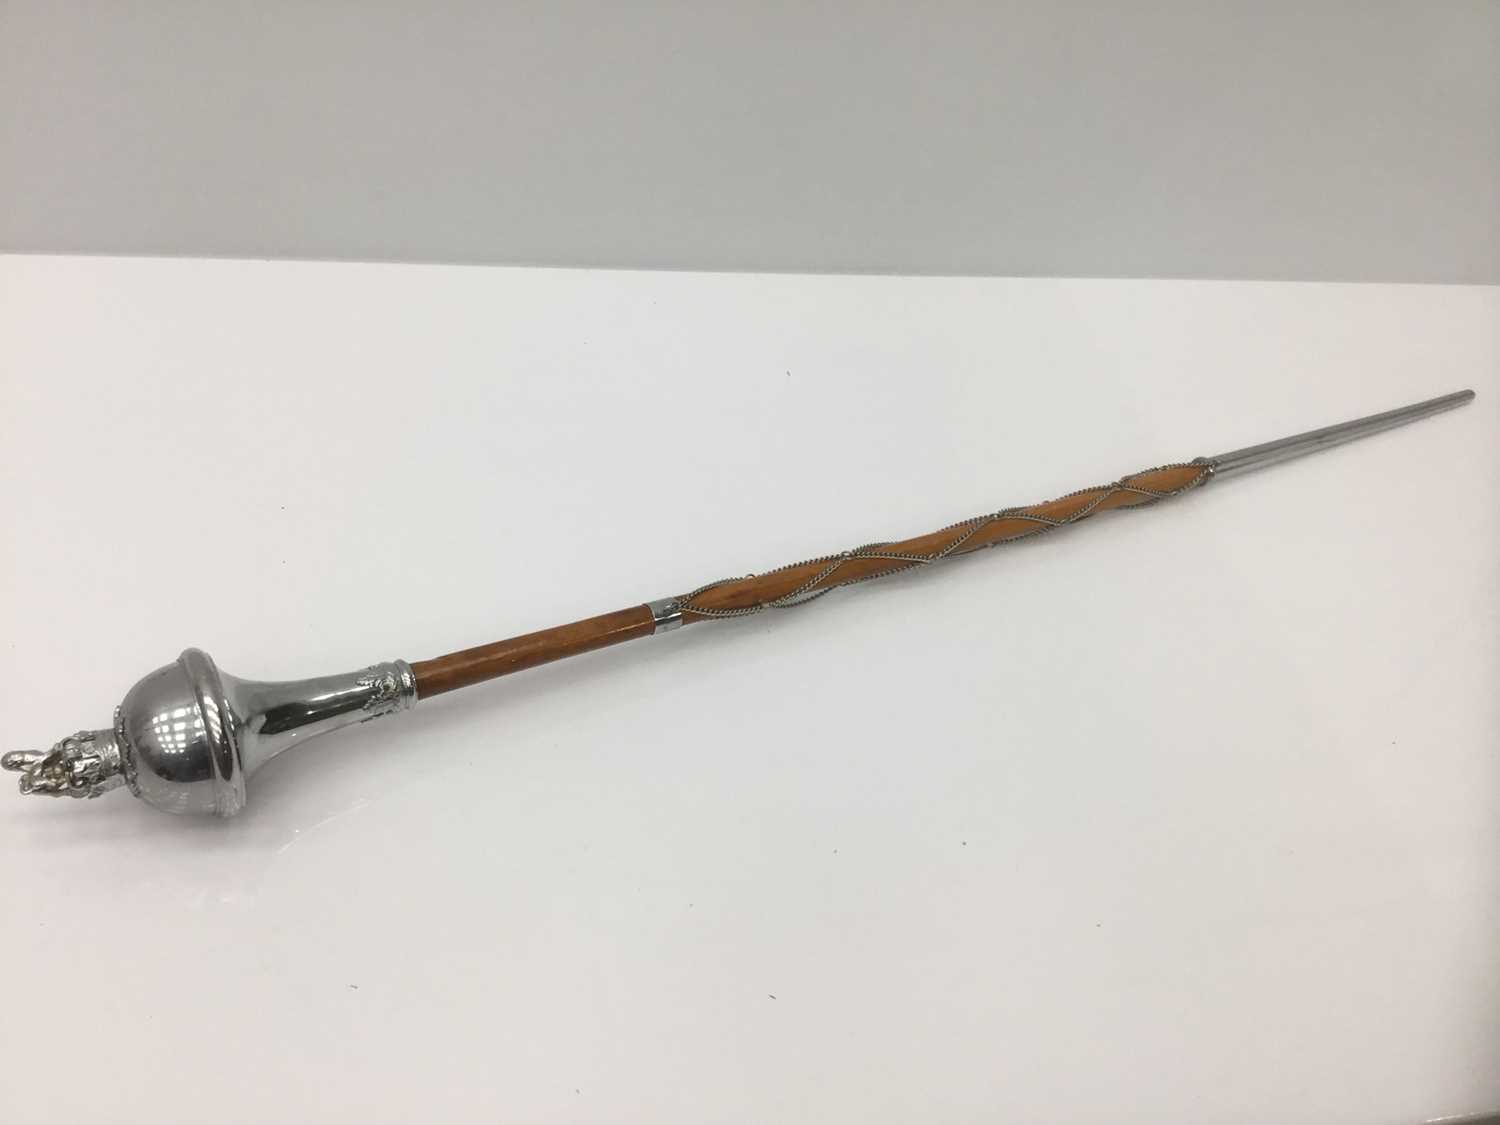 Marching bandmaster's staff, approximately 137cm long